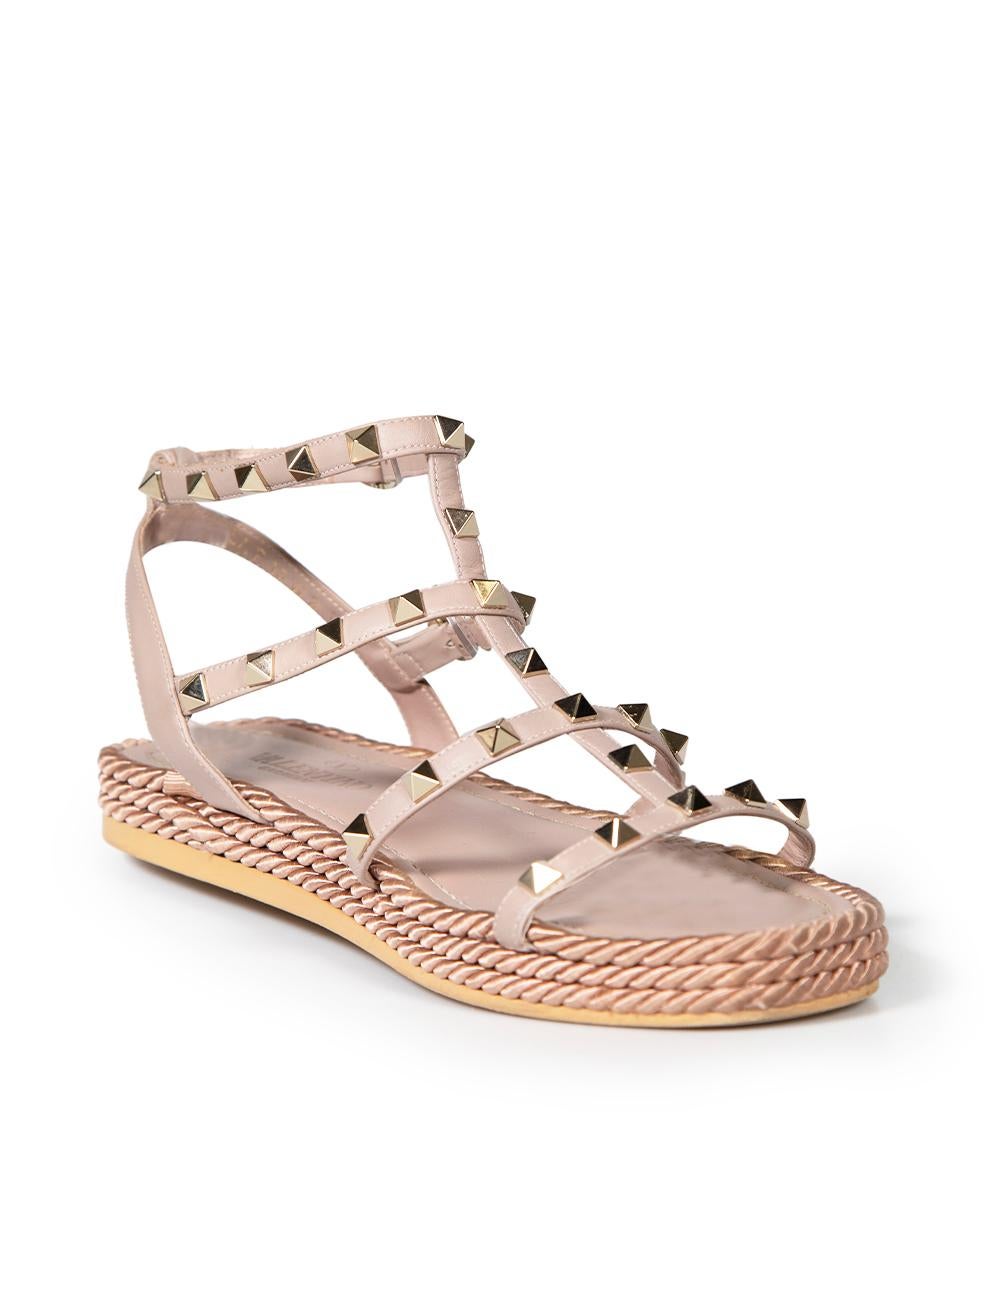 CONDITION is Very good. Minimal wear to sandals is evident. Minimal creasing to inner soles on this used Valentino designer resale item. These shoes come with original dust bag.
 
 
 
 Details
 
 
 Pink
 
 Leather
 
 Sandals
 
 Rockstud detail
 
